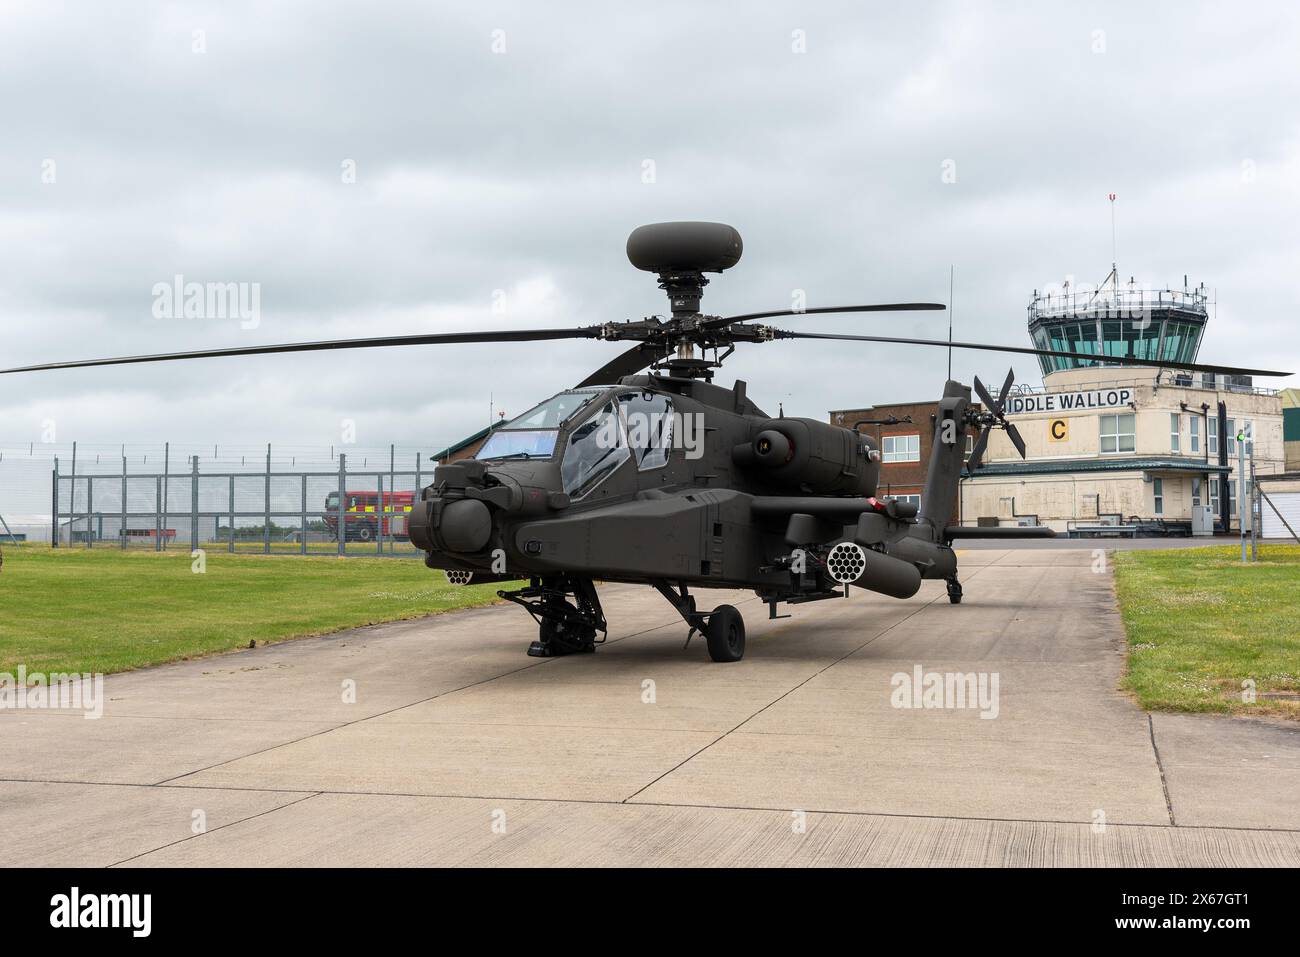 Middle Wallop, UK, 13 May, 2024. An Apache helicopter is parked as His Majesty King Charles III  officially handed over the role of Colonel-in-Chief of the Army Air Corps to His Royal Highness The Prince of Wales at the Army Aviation Centre in Middle Wallop, Hampshire. Credit: A.A. Gill/Alamy Live News Stock Photo